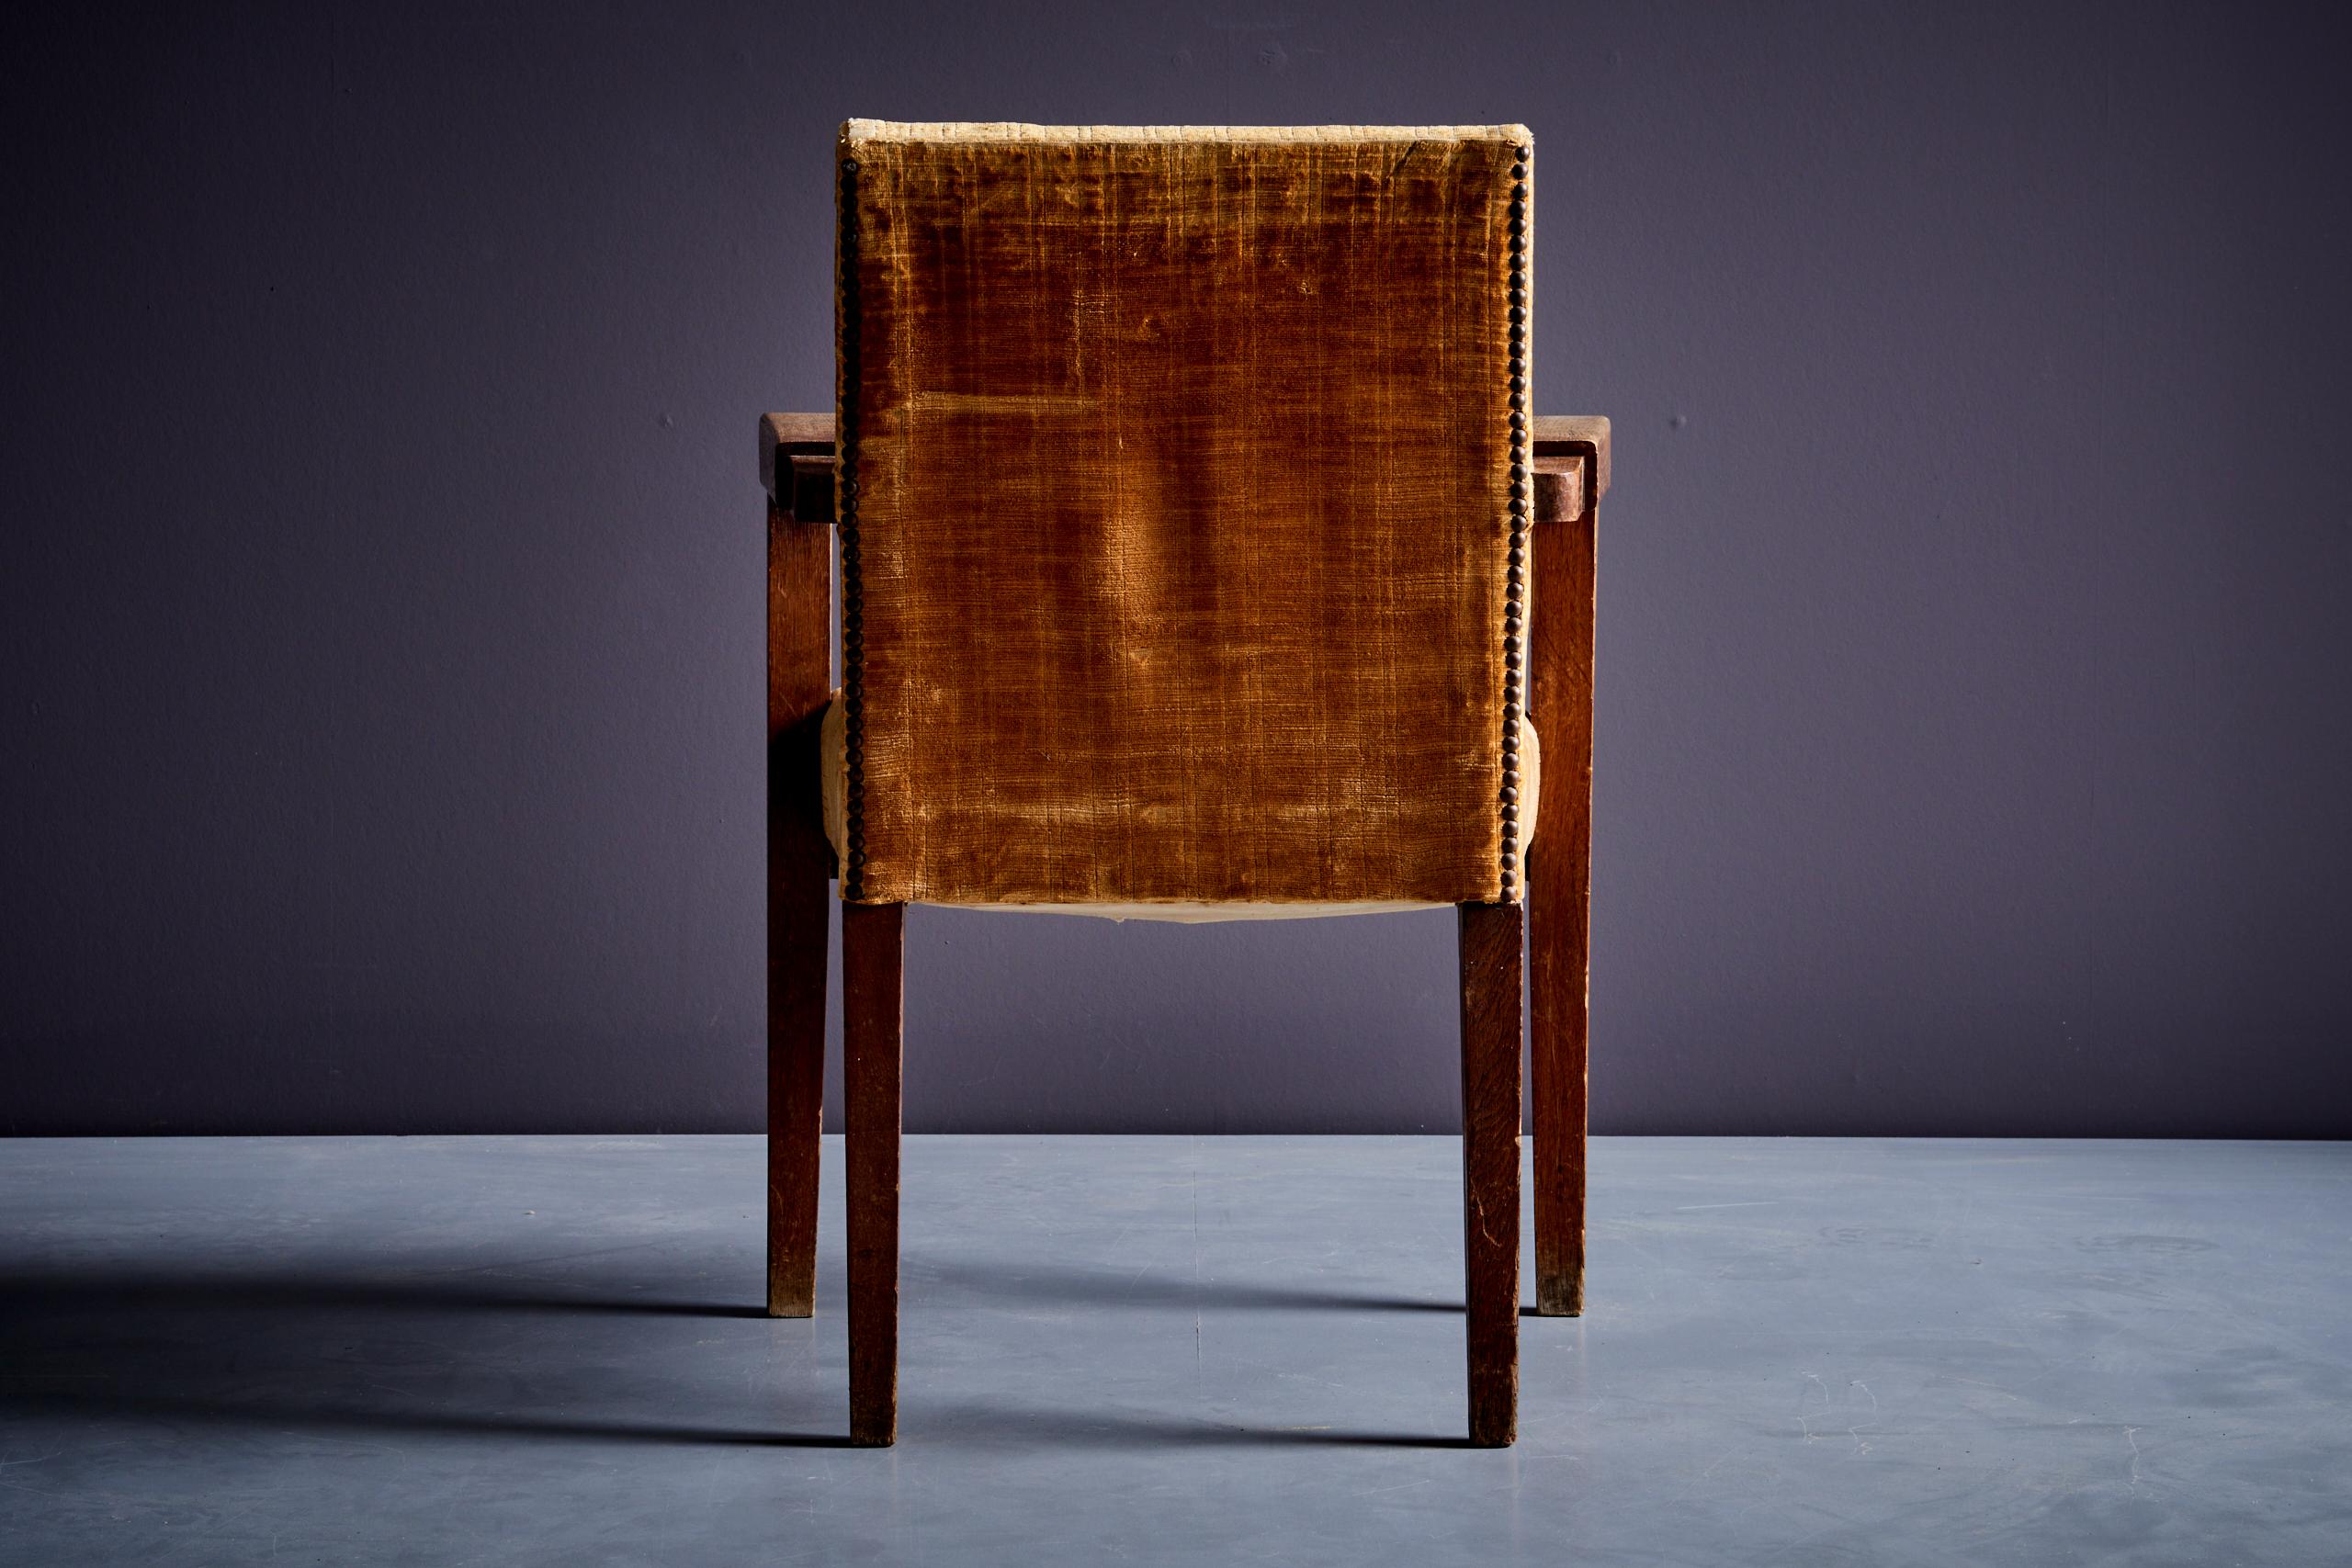 Art Deco Armchair in Oak and mustard colored Upholstery, France - 1940s For Sale 1